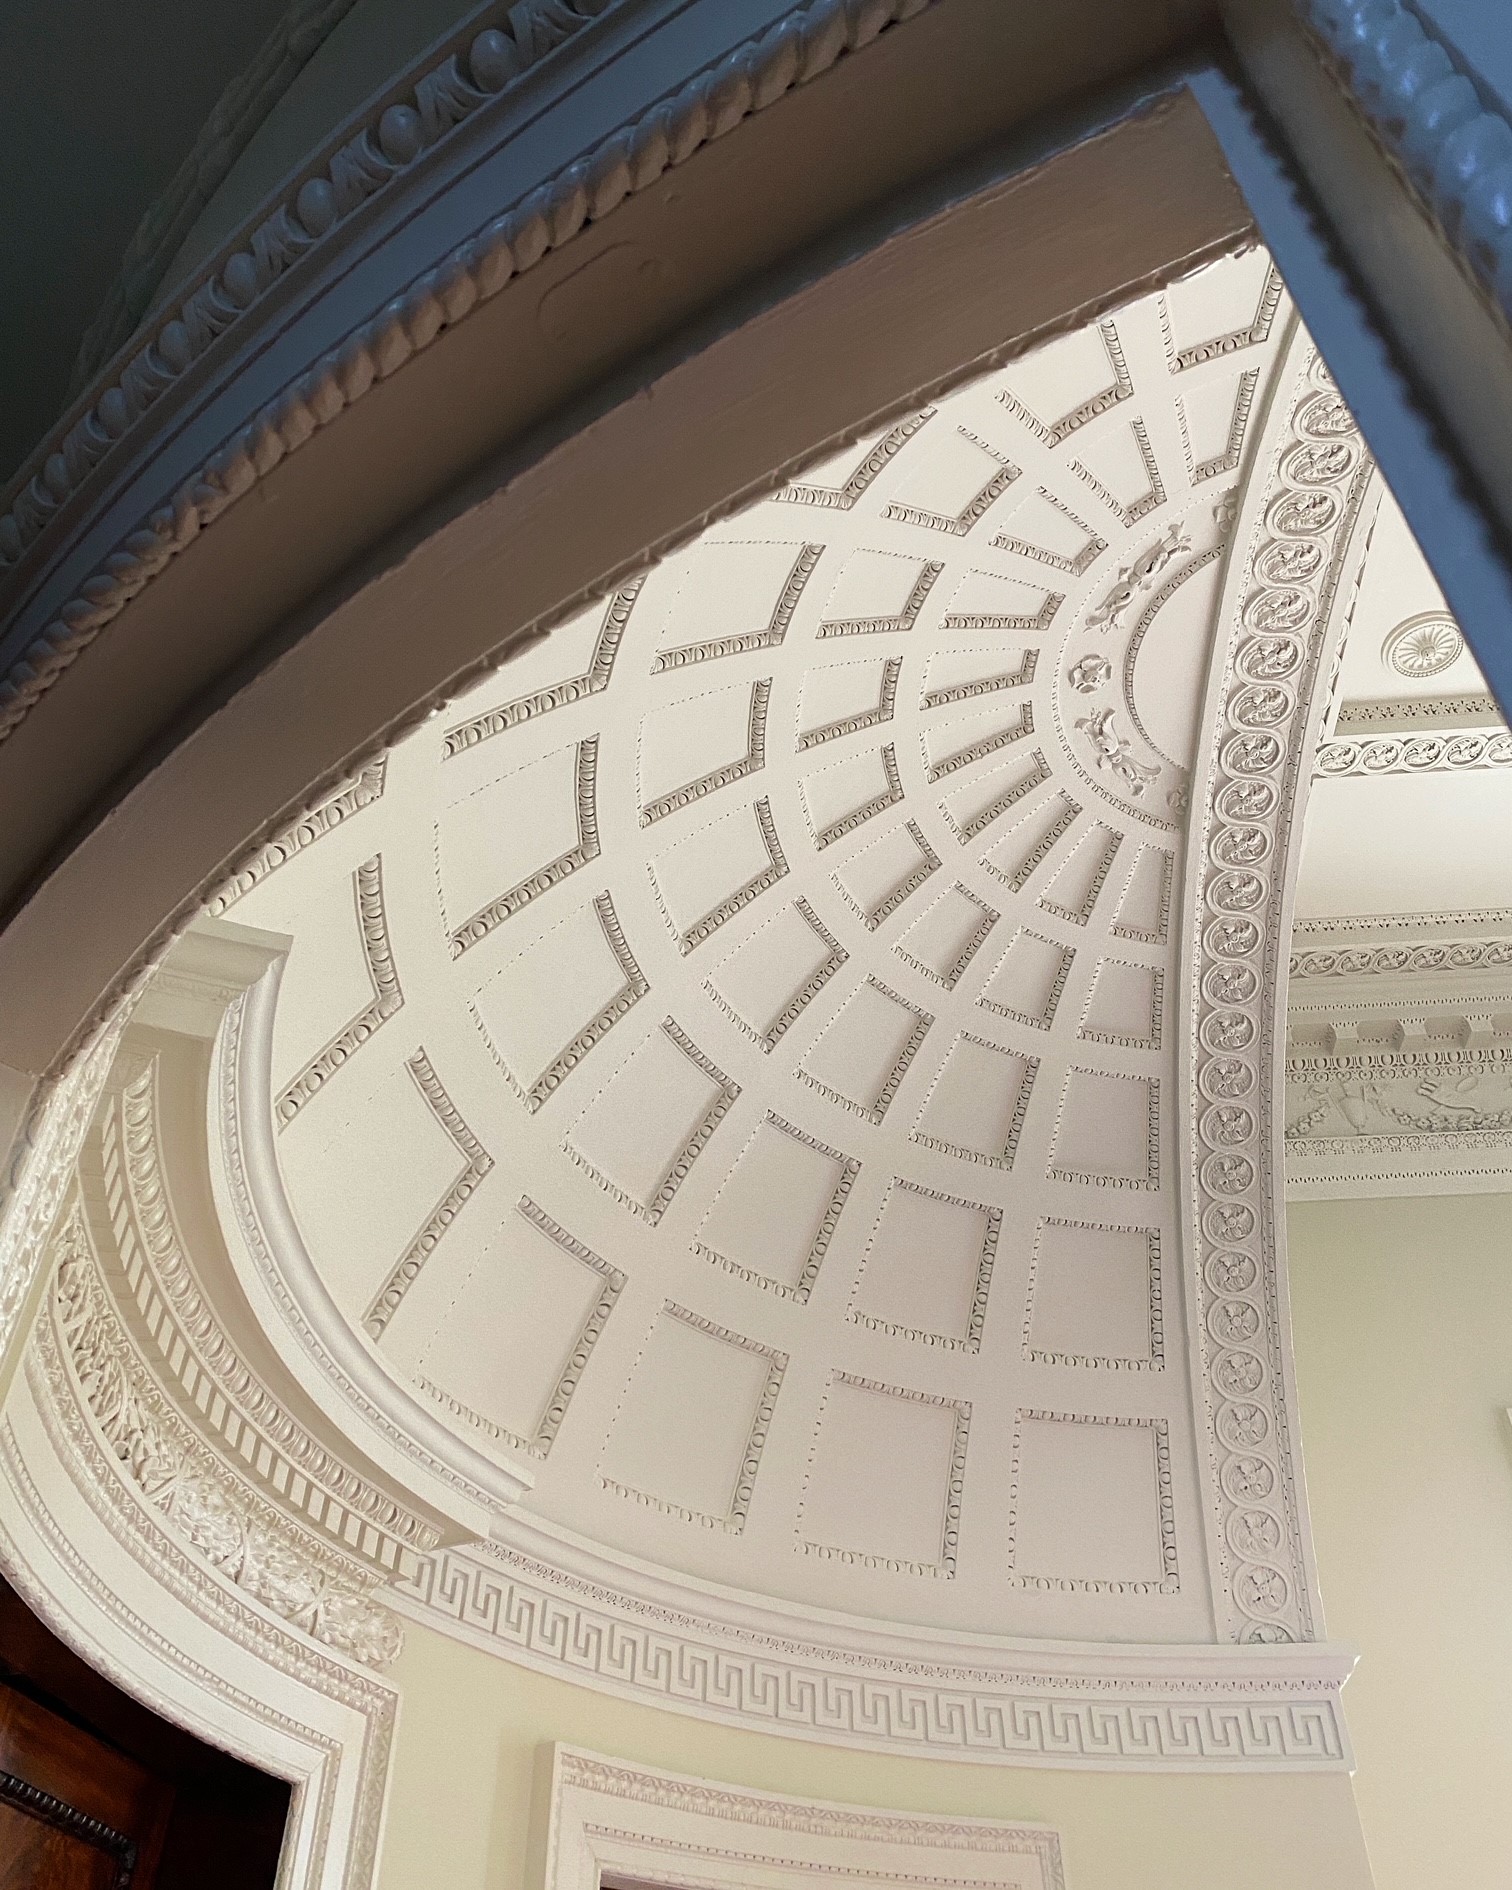 The semi circular apse, replicating the dome of the Pantheon in Rome